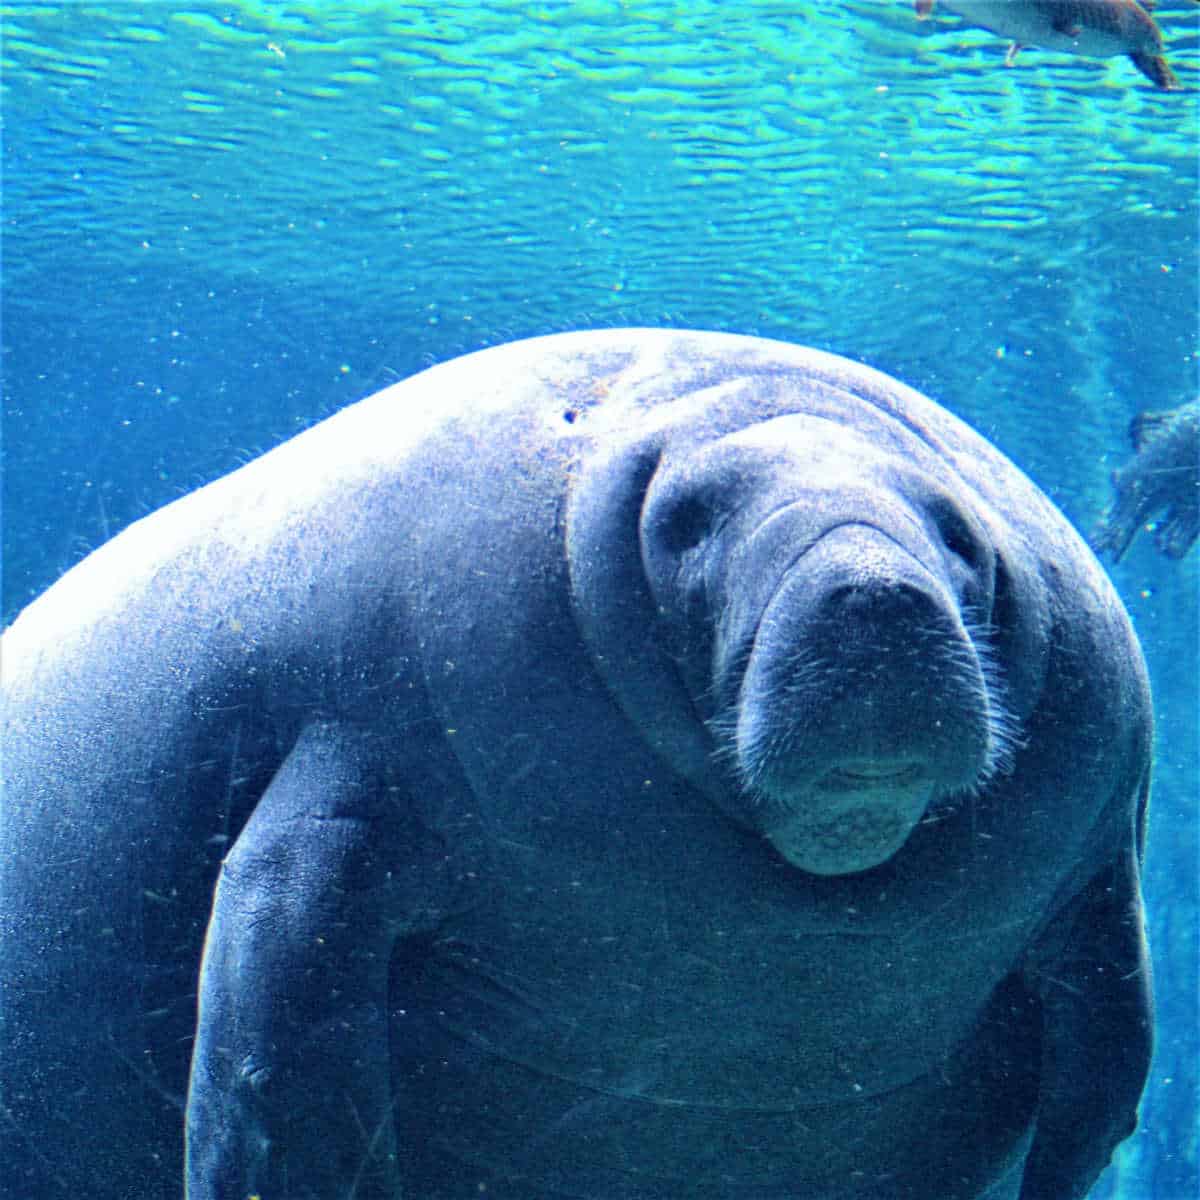 Large manatee in water